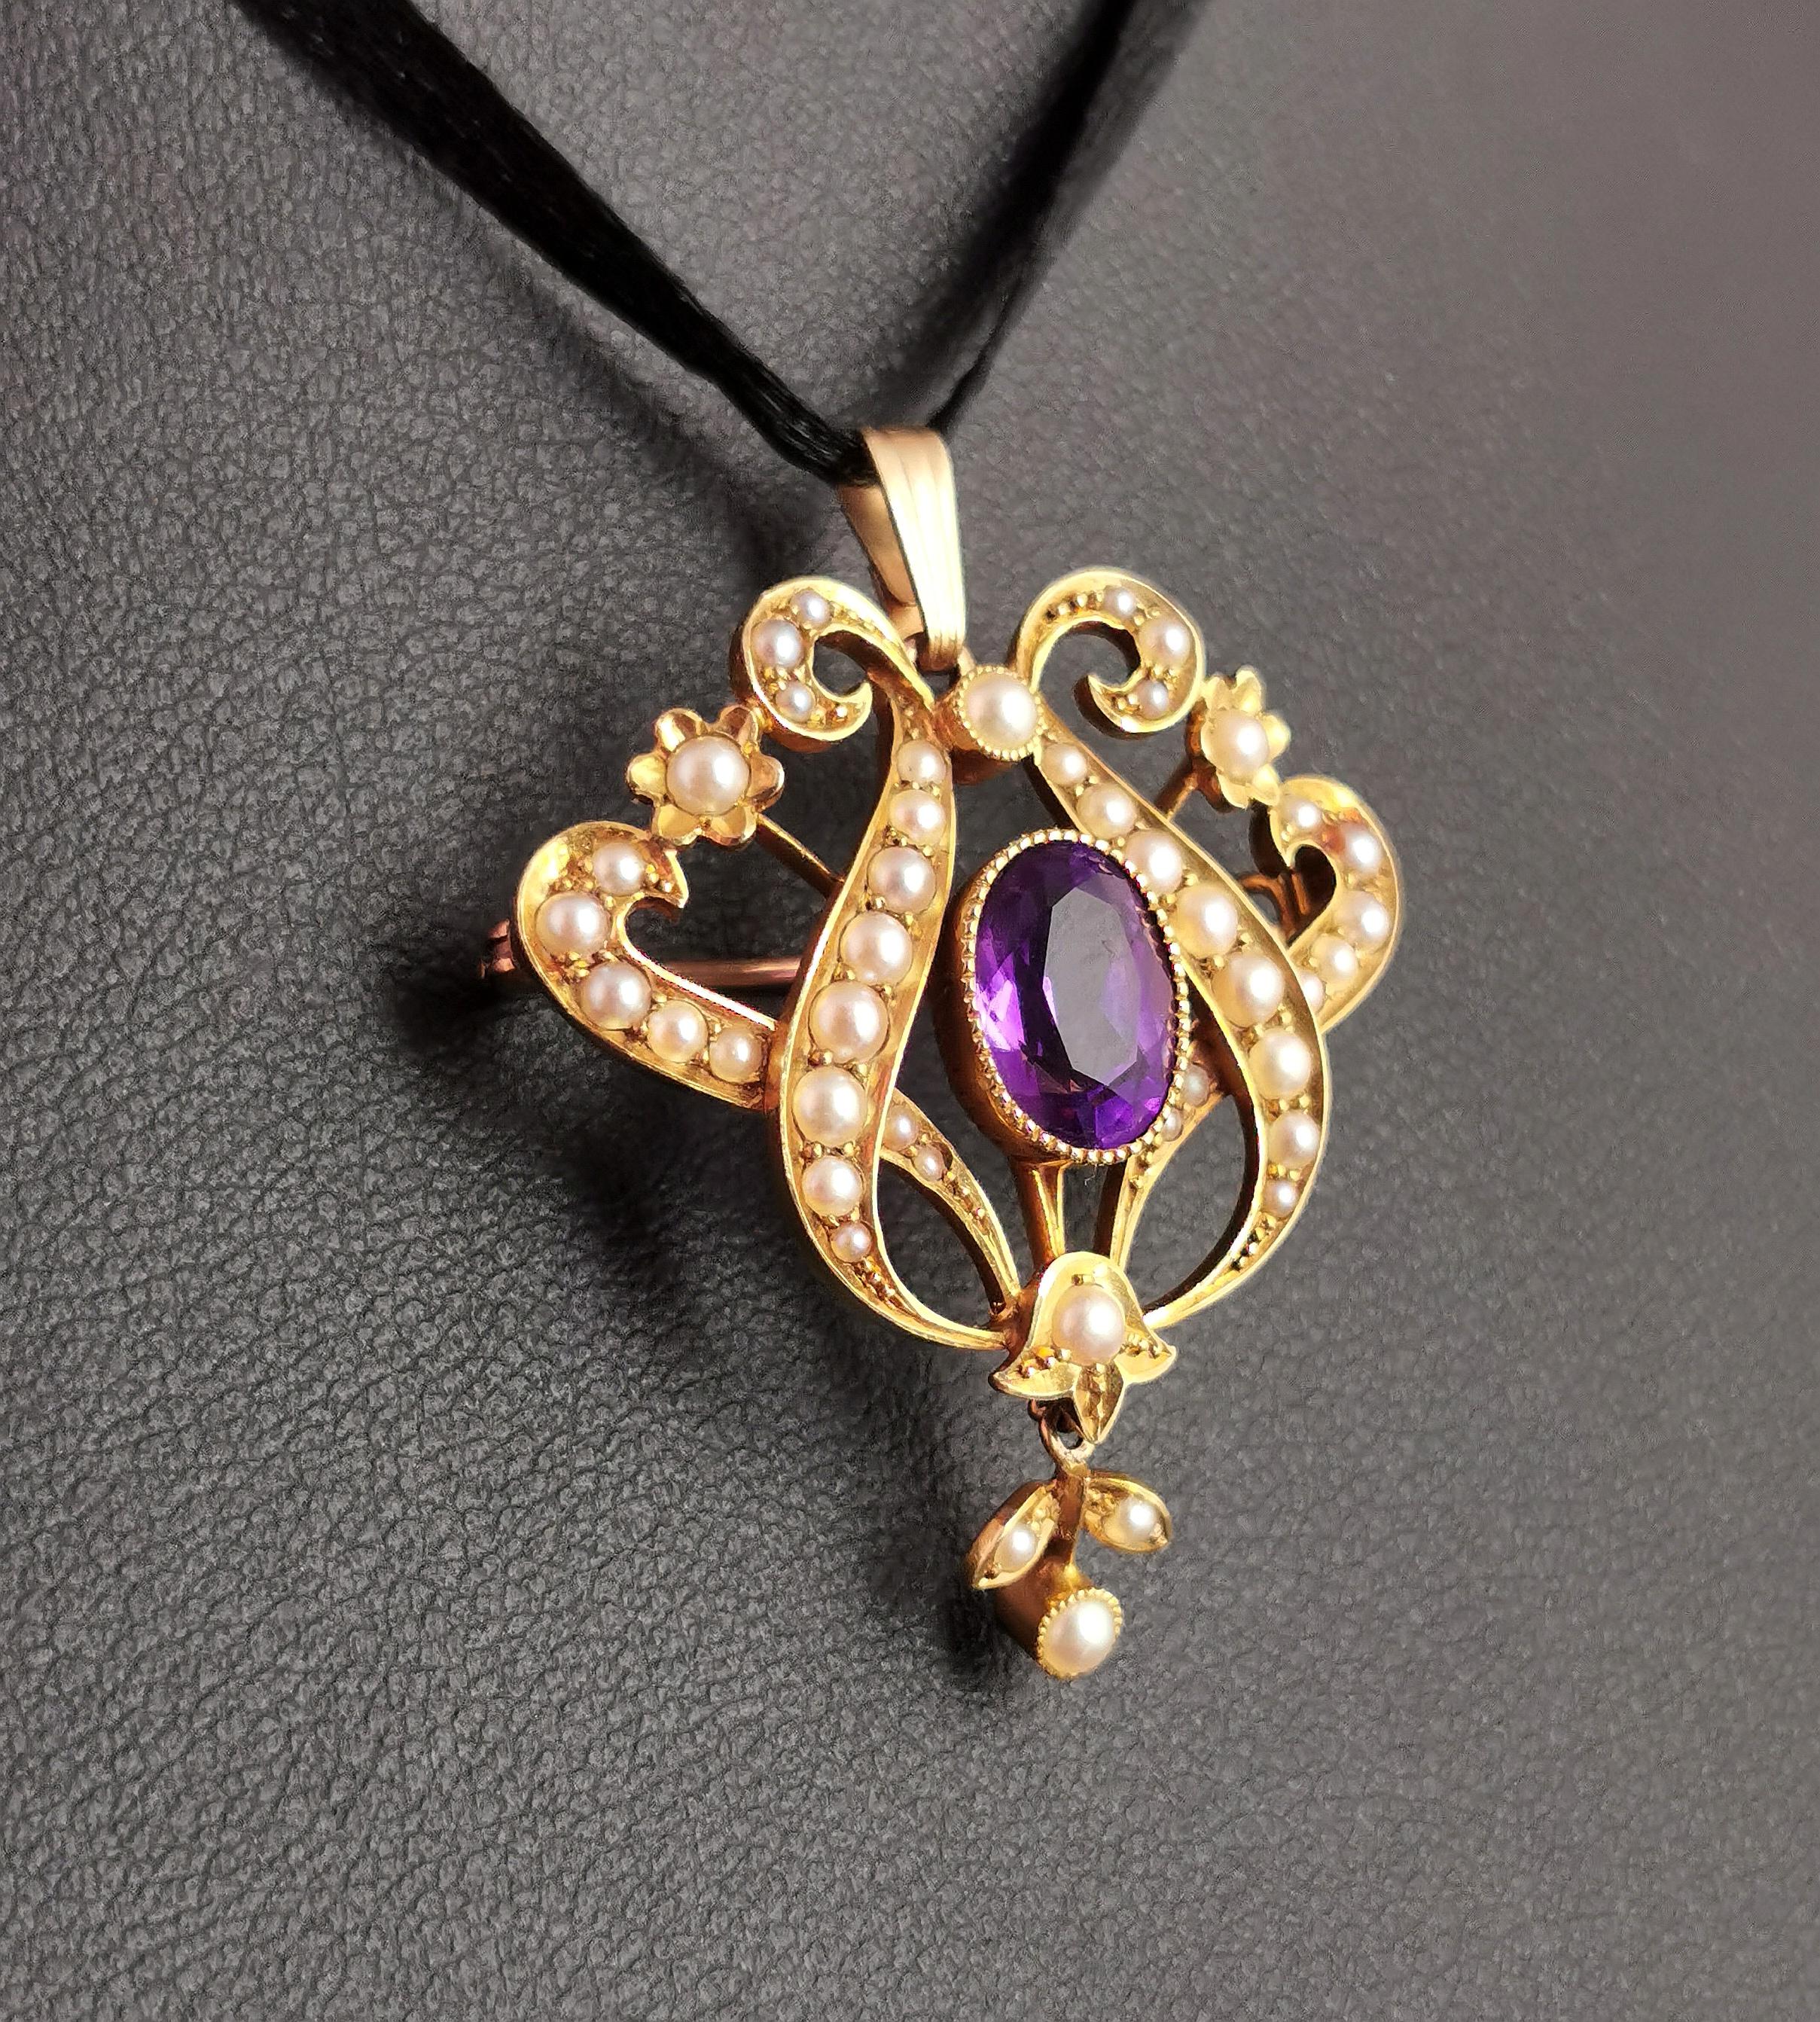 Oval Cut Antique Art Nouveau Amethyst and Pearl Pendant Brooch, 15kt Yellow Gold